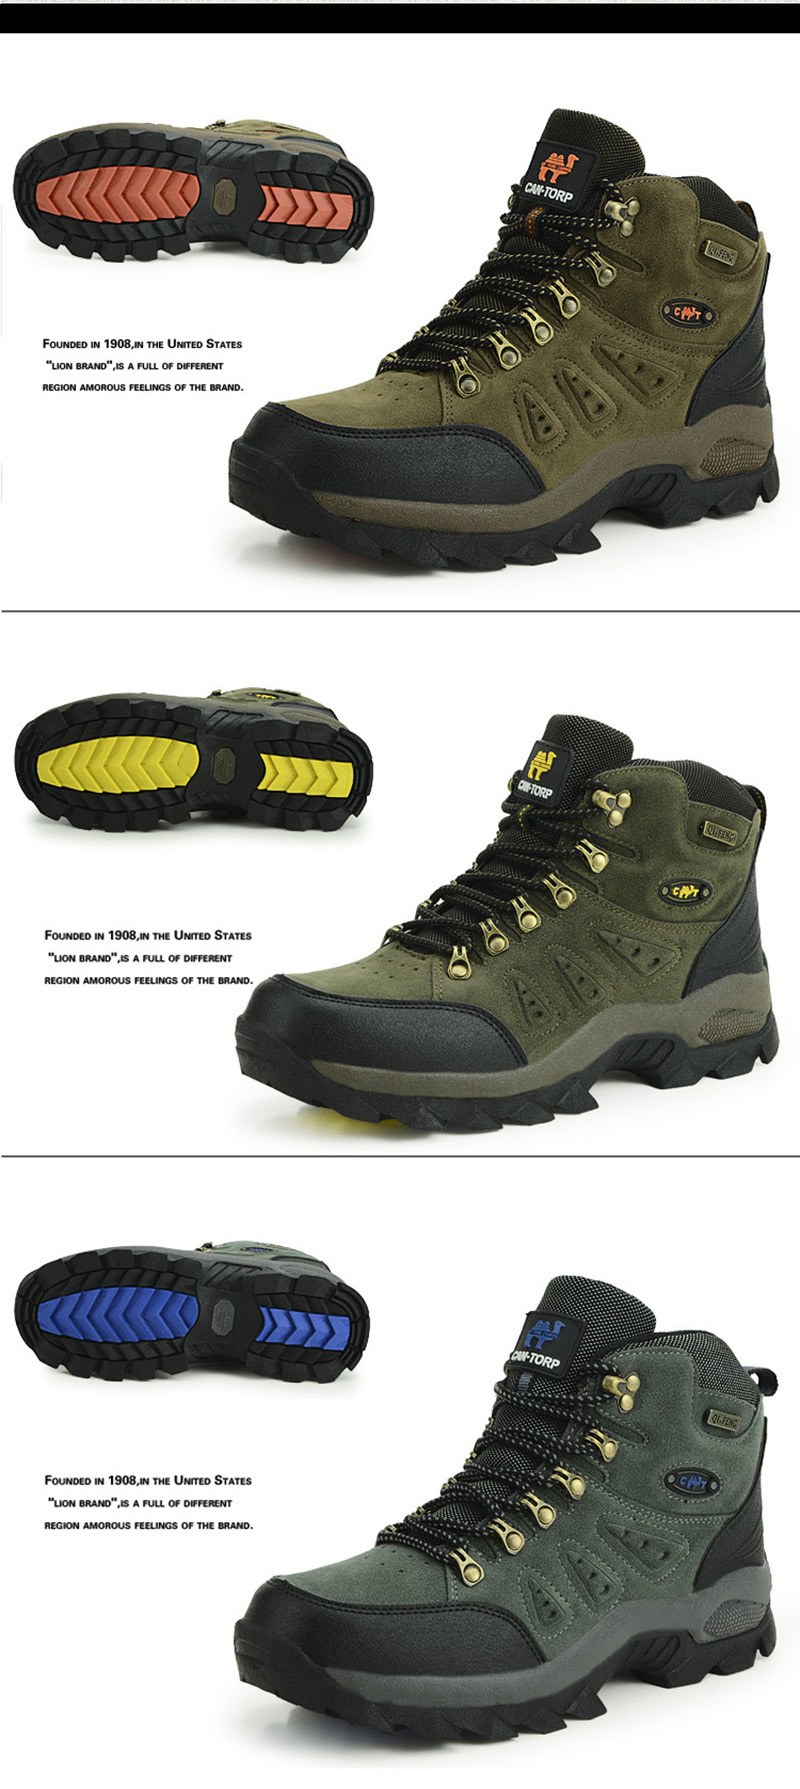 Unisex Water-resistant Hiking Boots Trekking Shoes